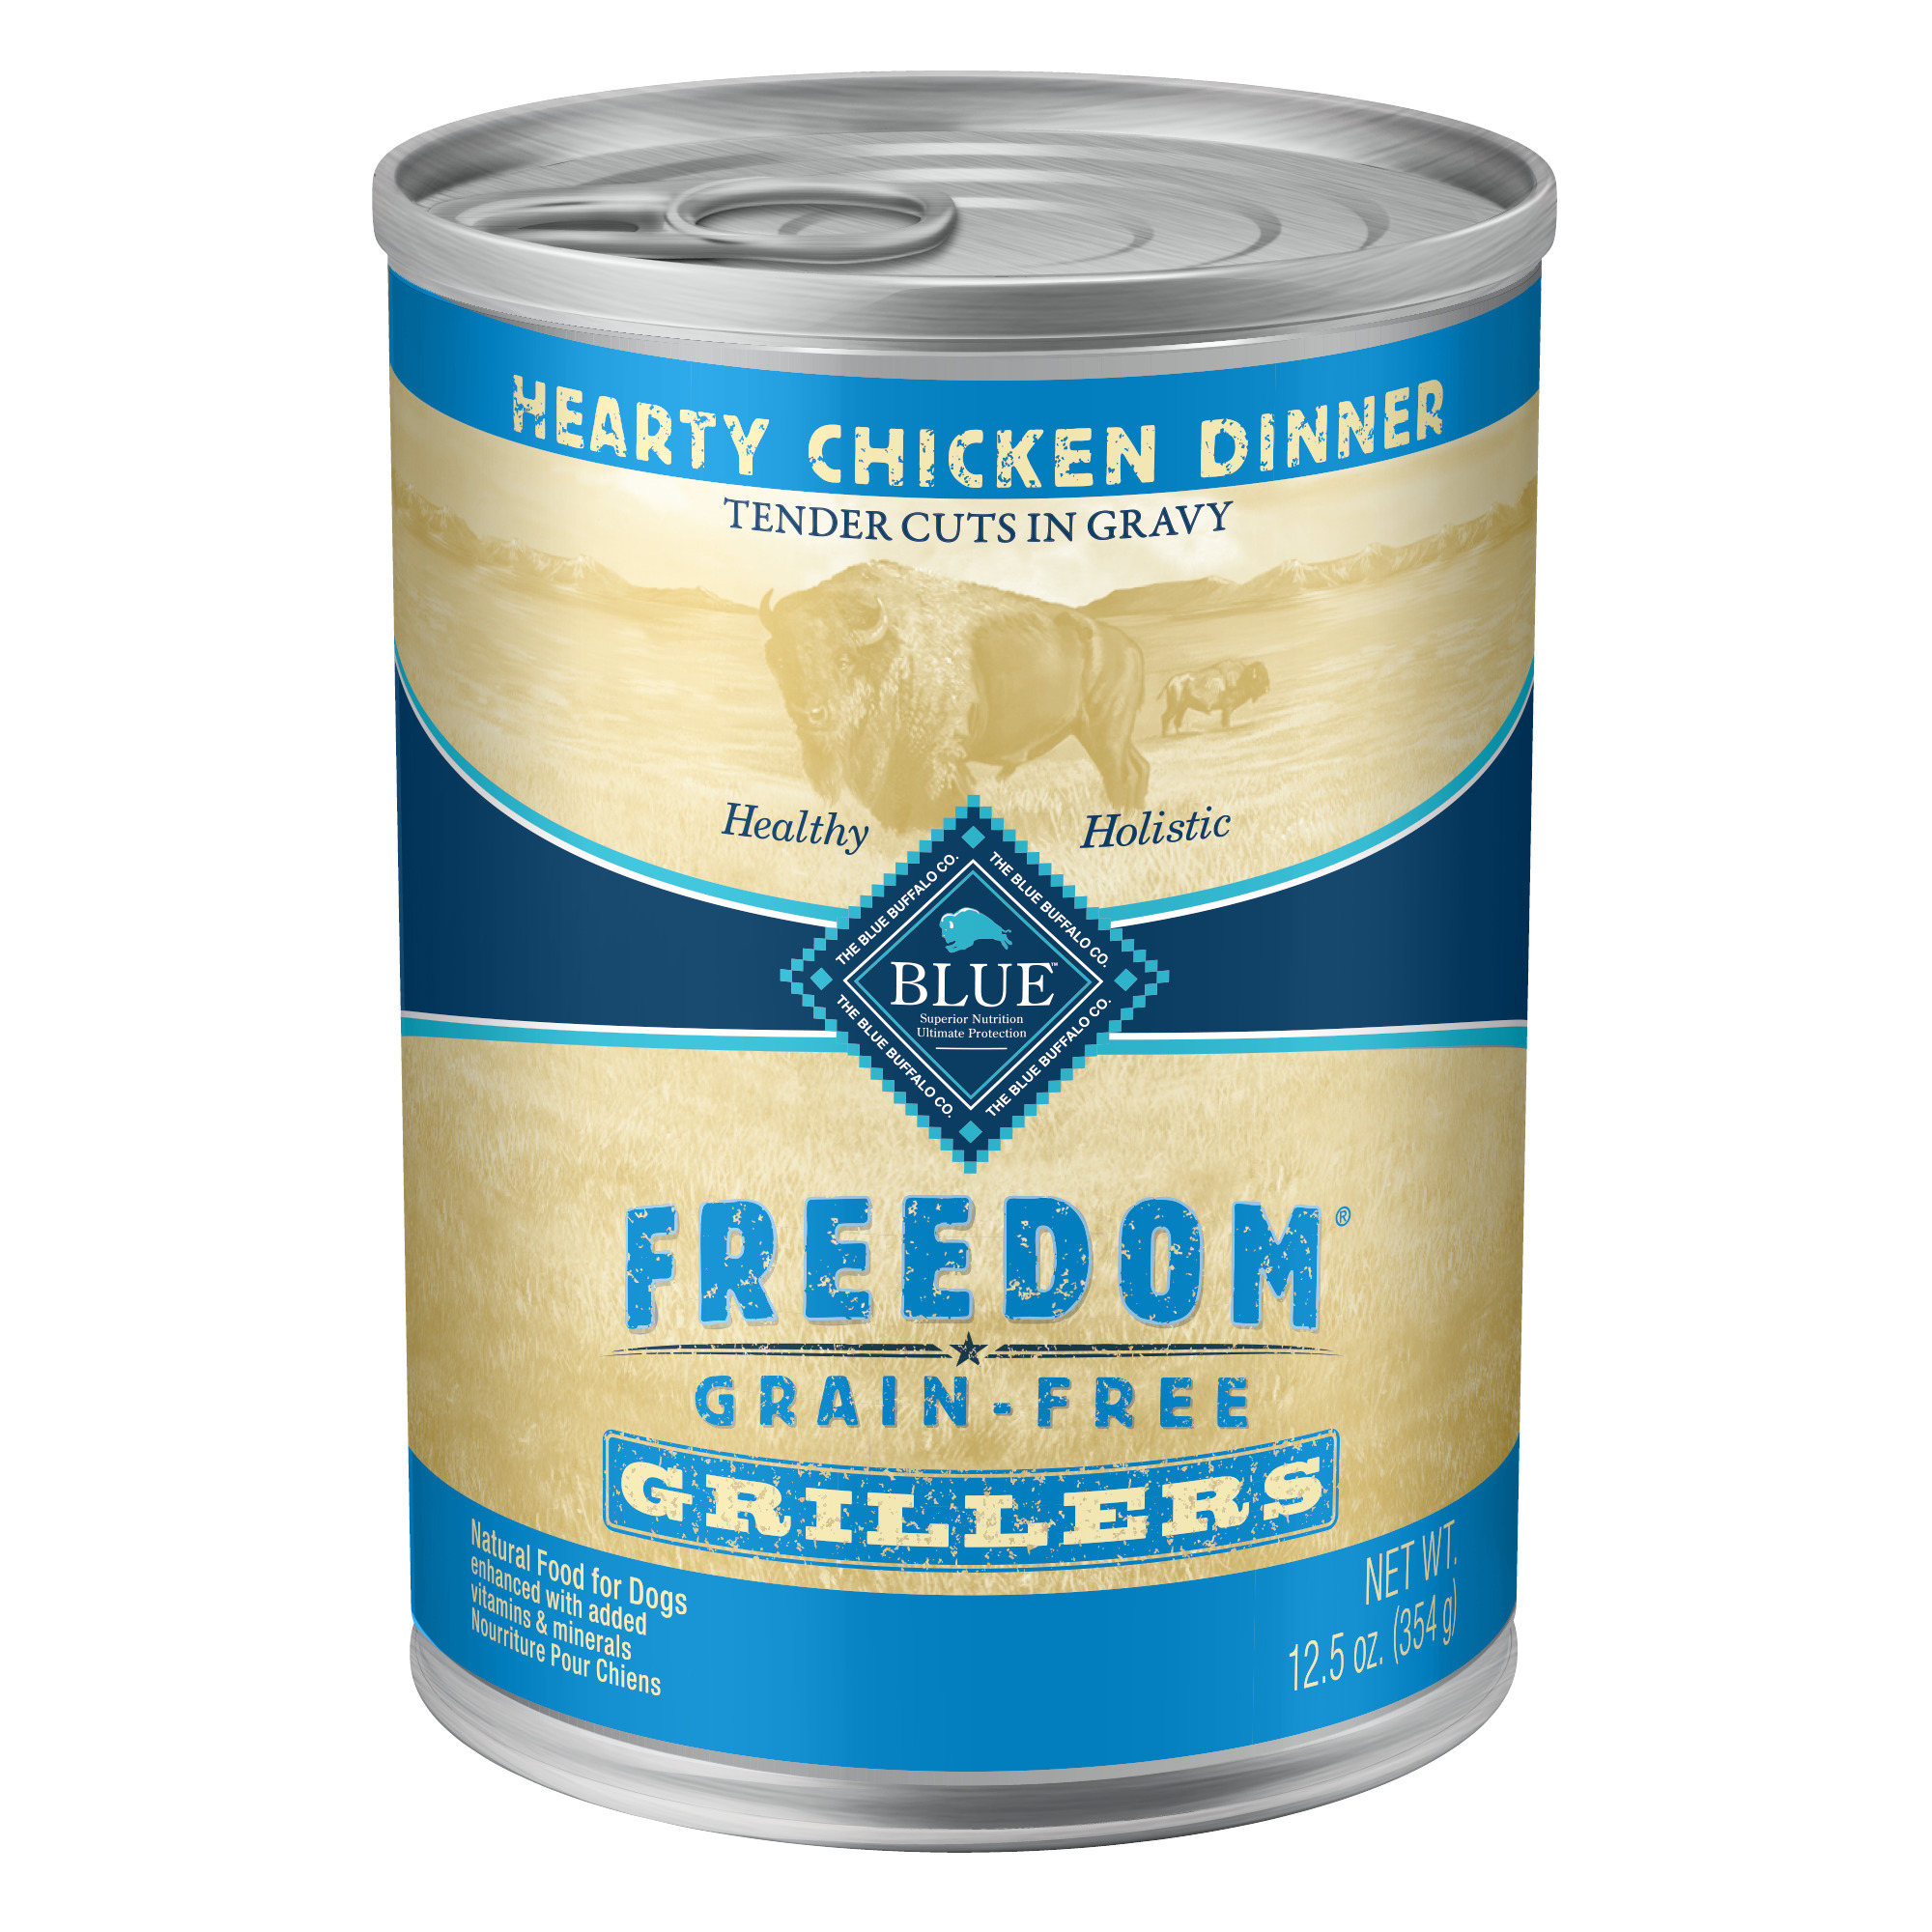 BLUE Freedom Grain-Free Grillers Hearty Chicken Dinner For Adult Dogs, 12.5